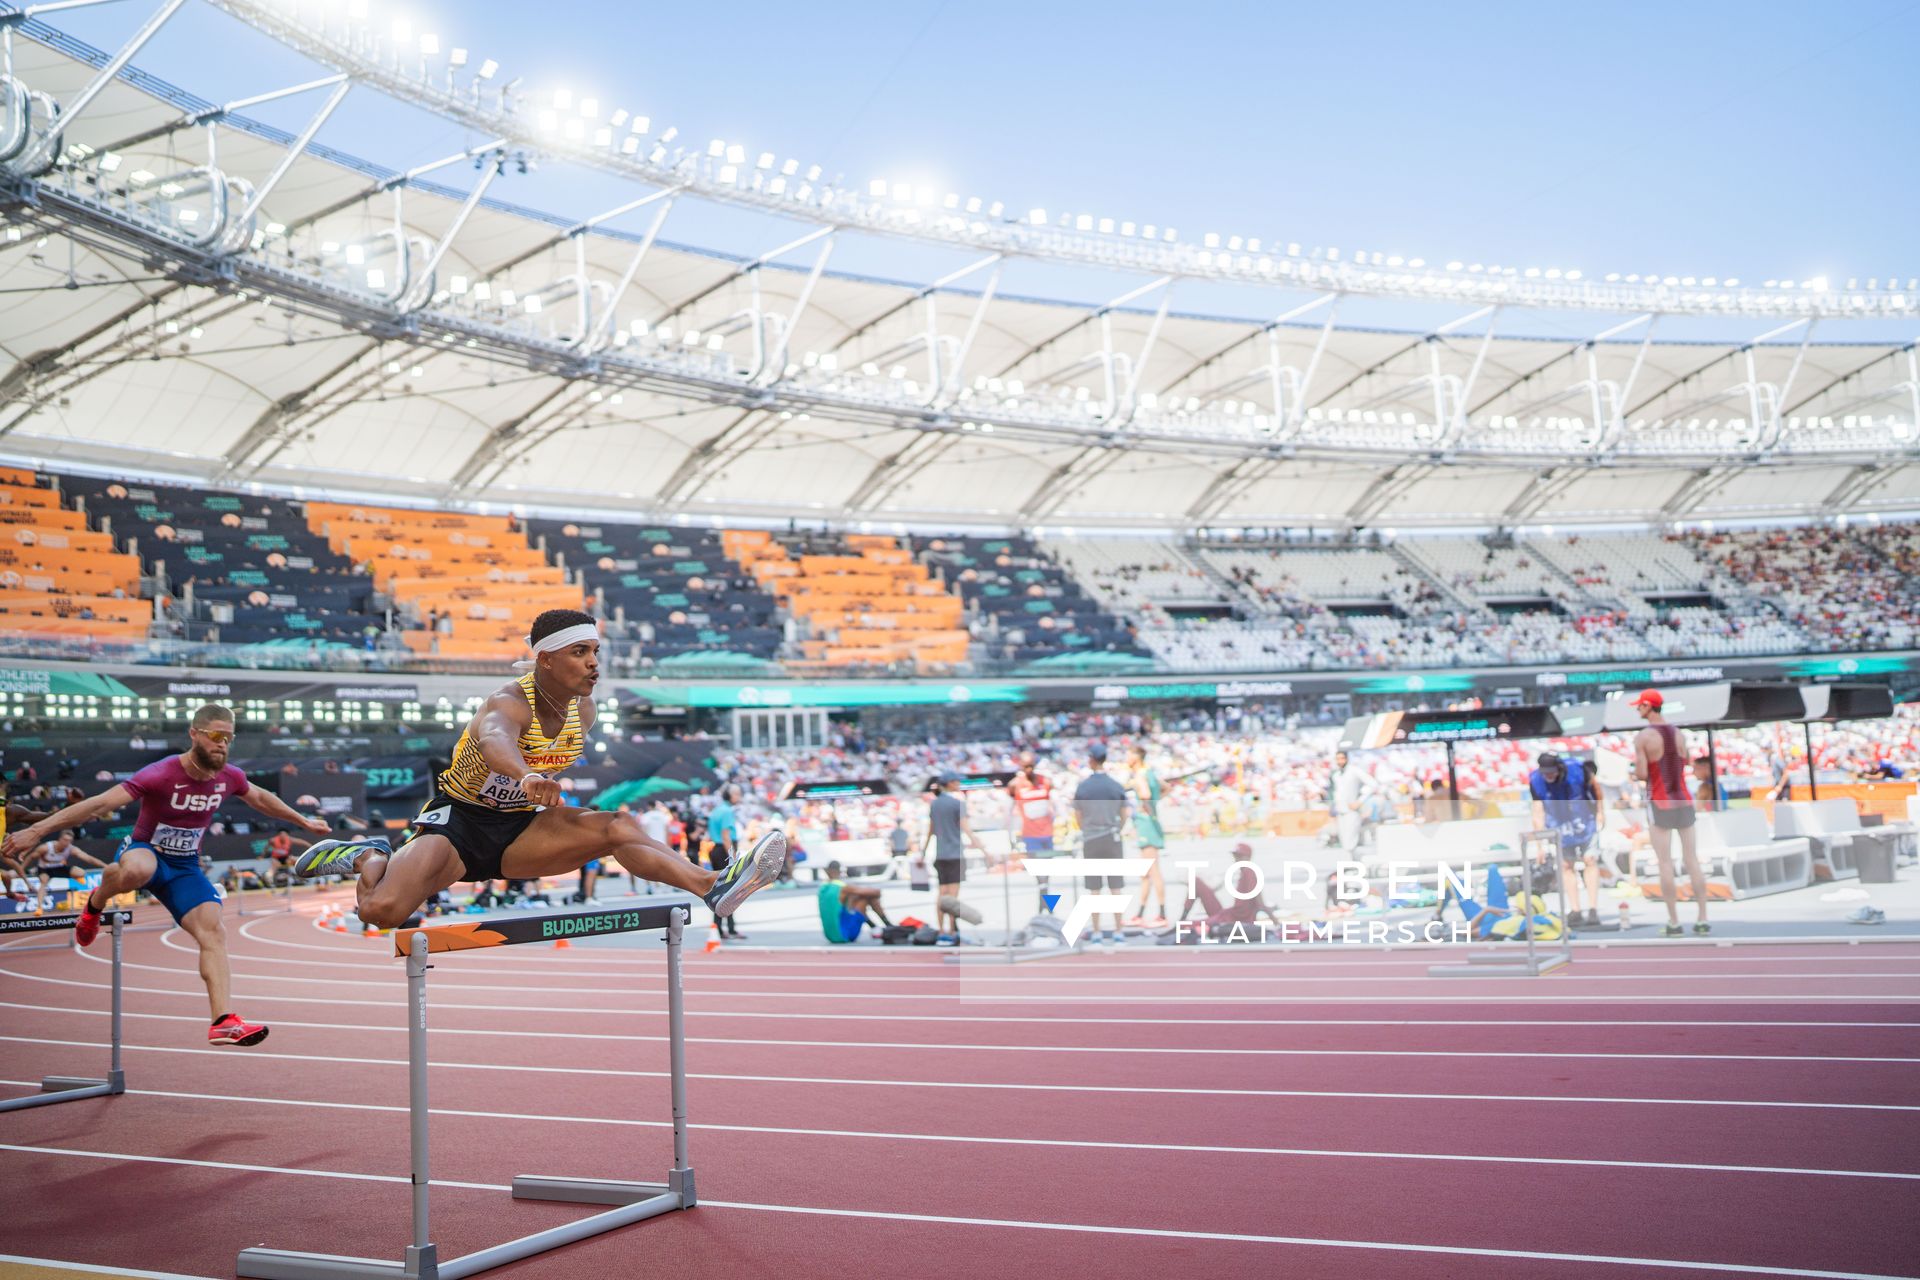 Joshua Abuaku (GER/Germany) during the 400 Metres Hurdles during day 2 of the World Athletics Championships Budapest 23 at the National Athletics Centre in Budapest, Hungary on August 20, 2023.